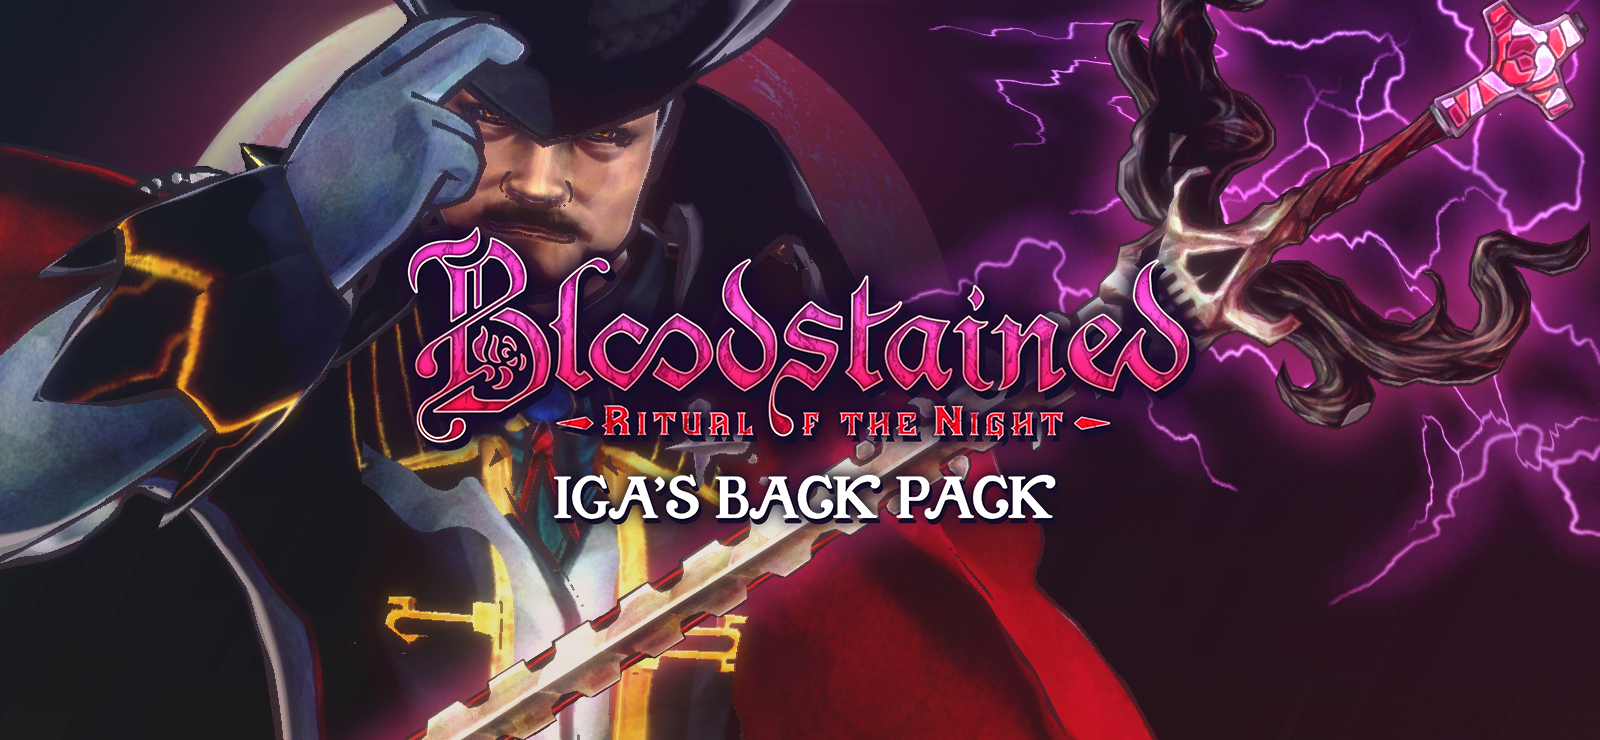 Bloodstained: IGA's Back Pack